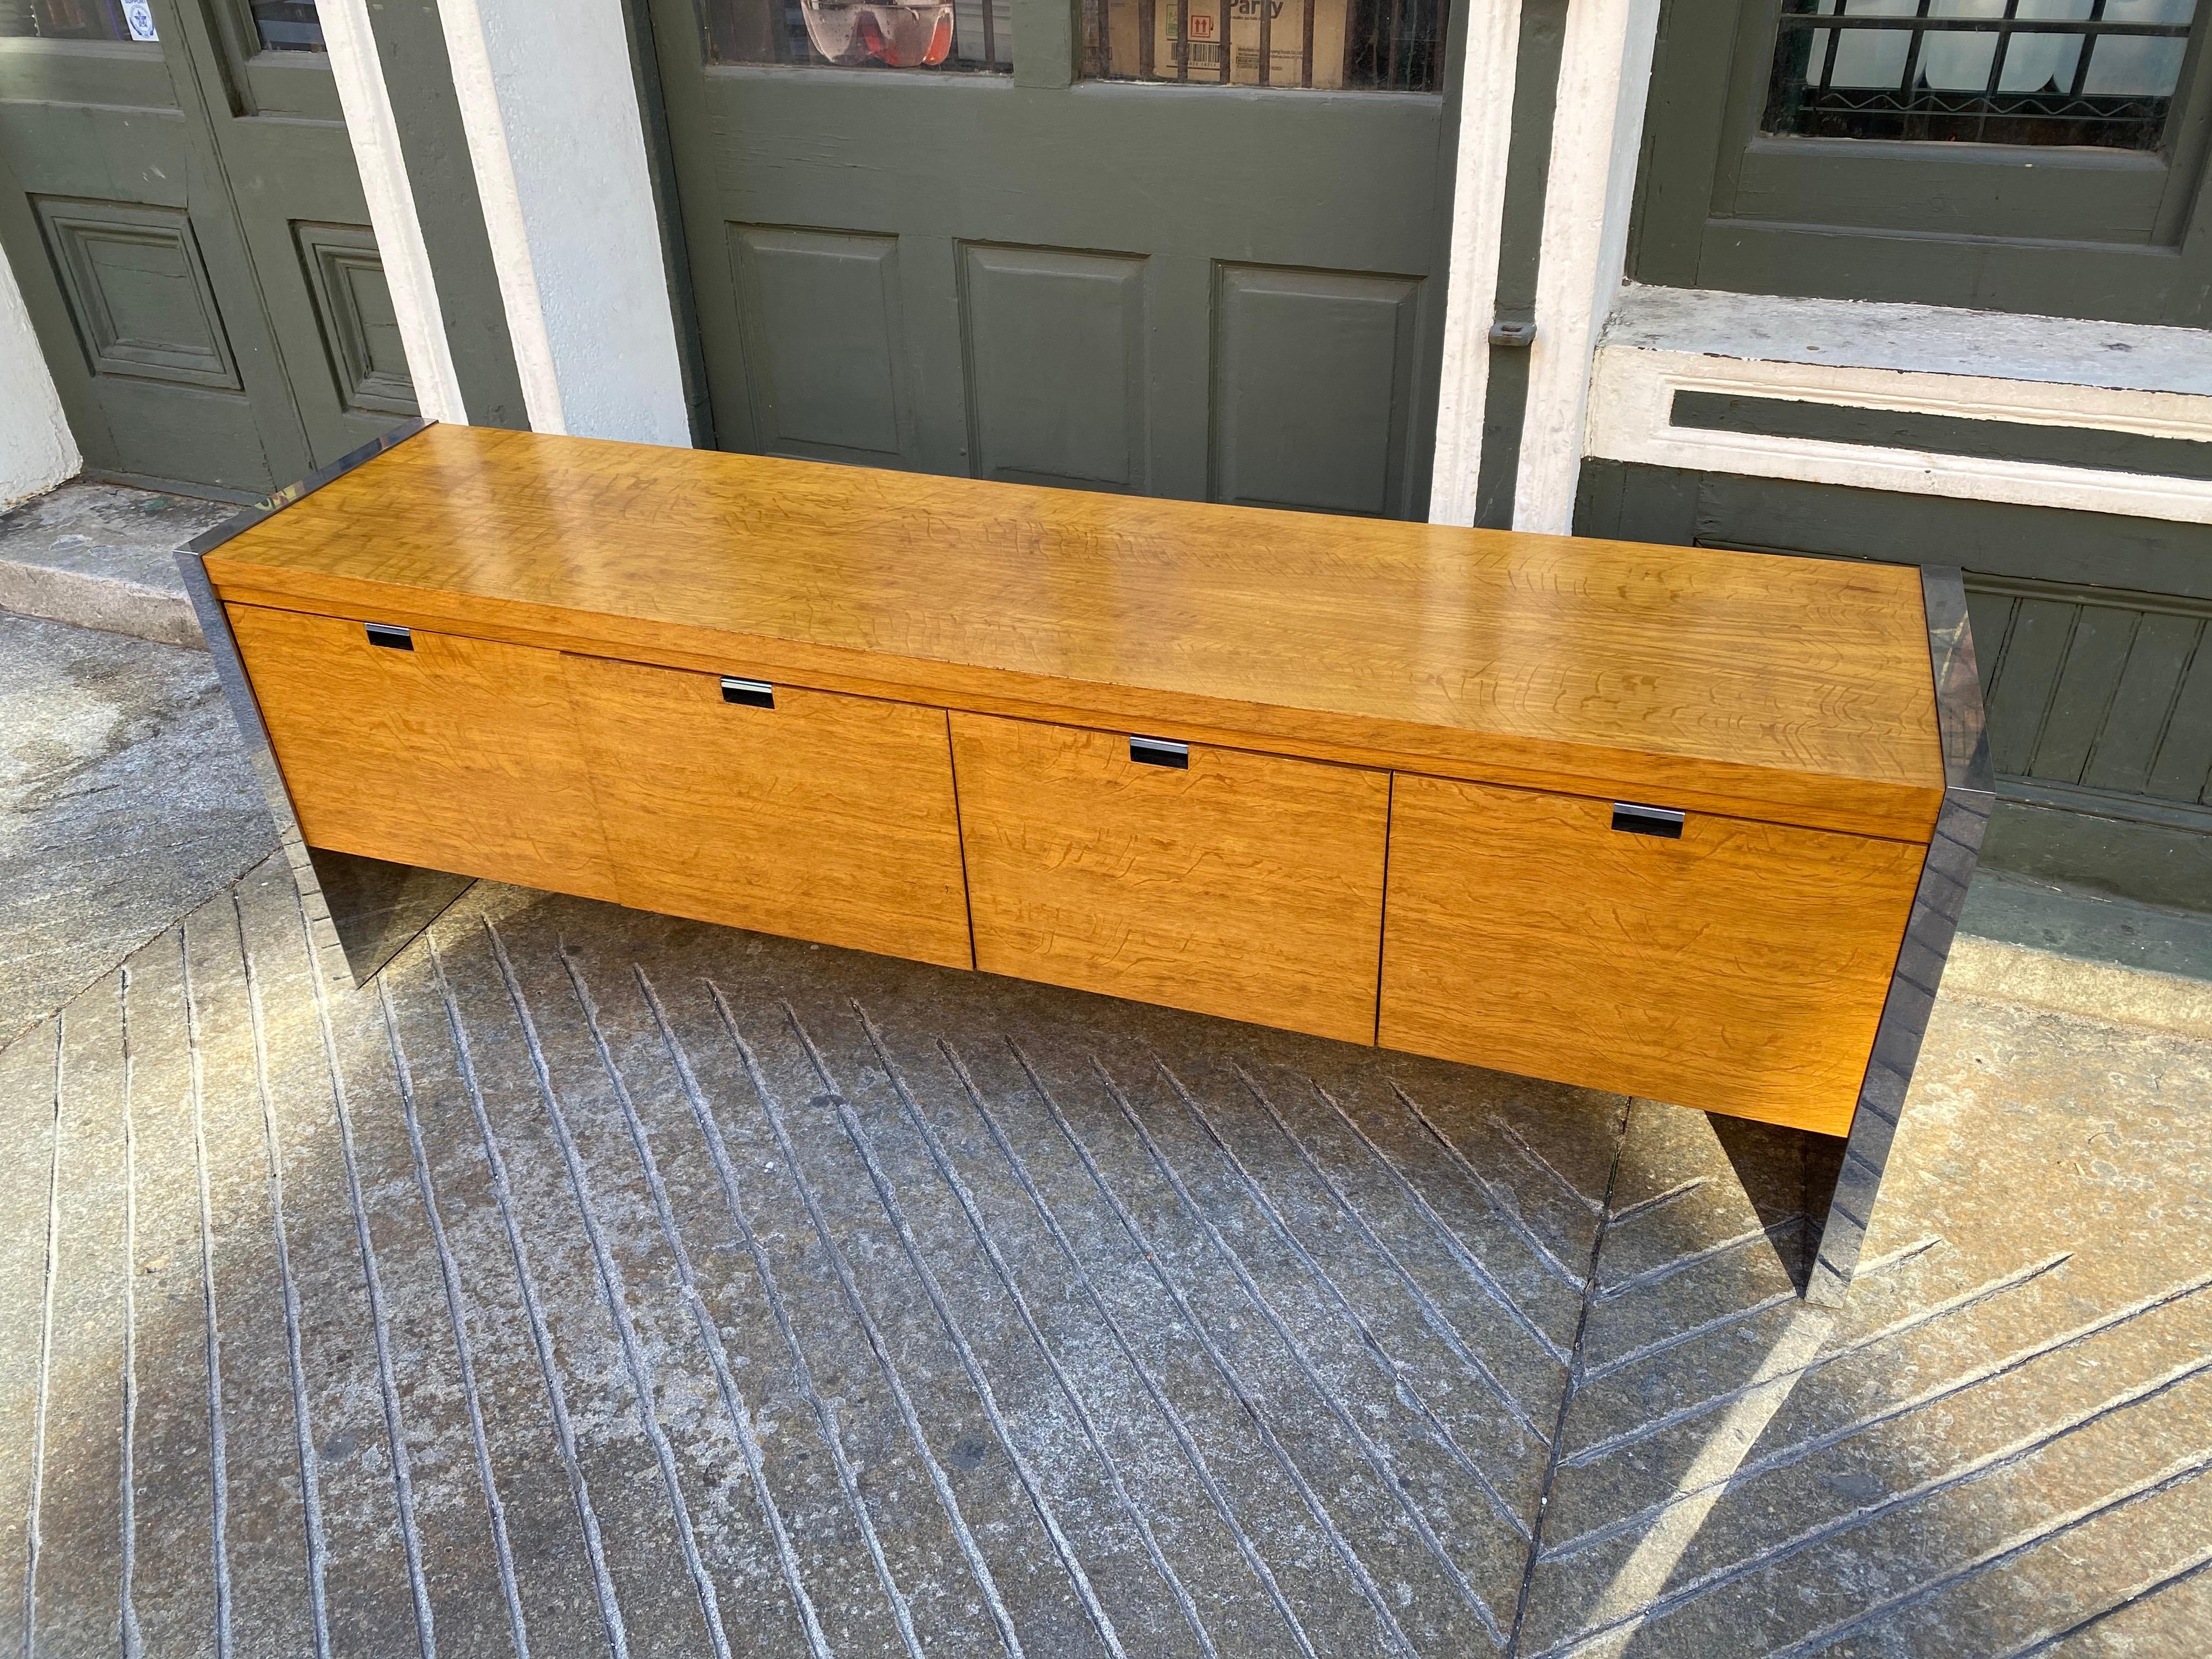 Roger Sprunger for Dunbar oak and chrome credenza. 4 pull out drawers set up for hanging files, but would work in numerous ways! People I bought from had part of it set up as a bar! In beautiful condition! Chrome ends are very clean and wood